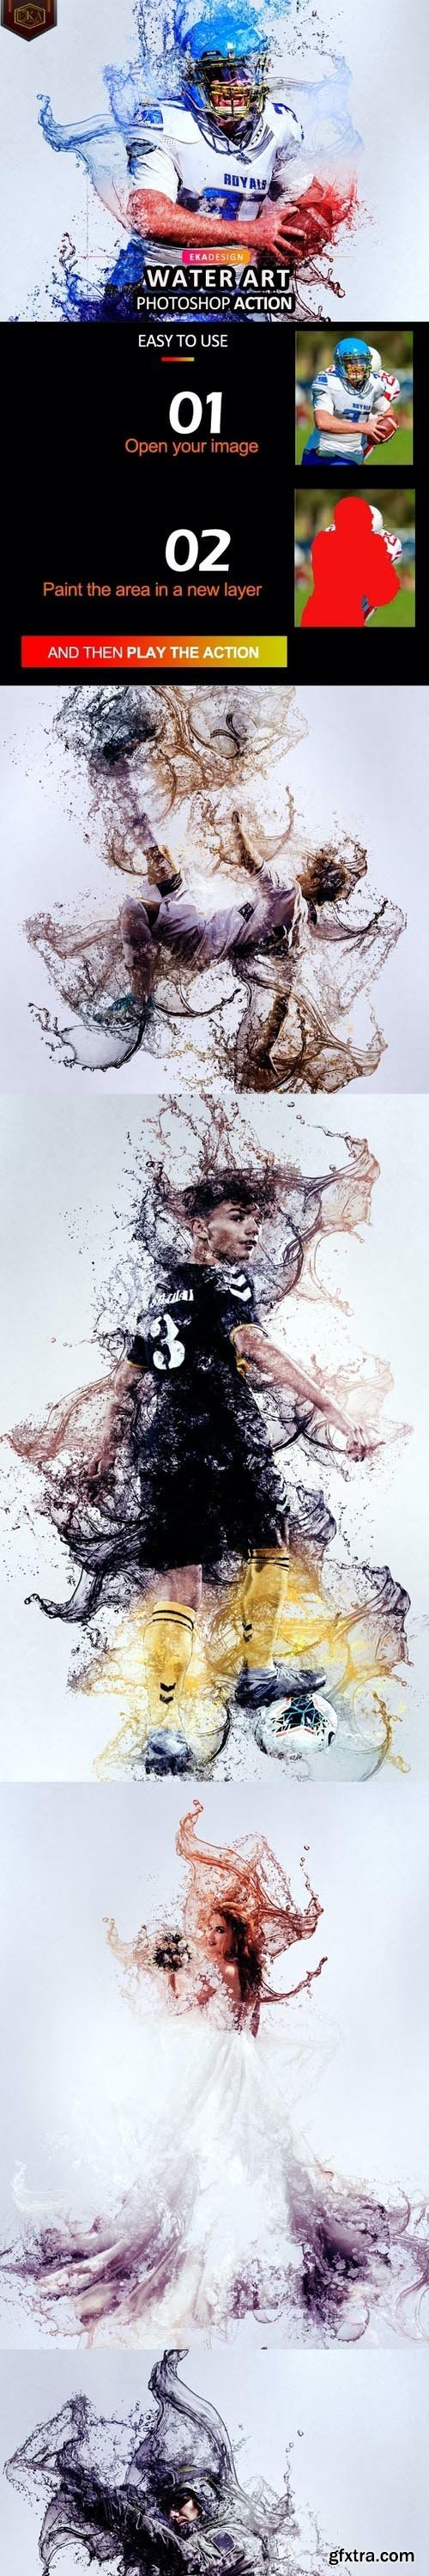 GraphicRiver - Water Art Photoshop Action 38130249